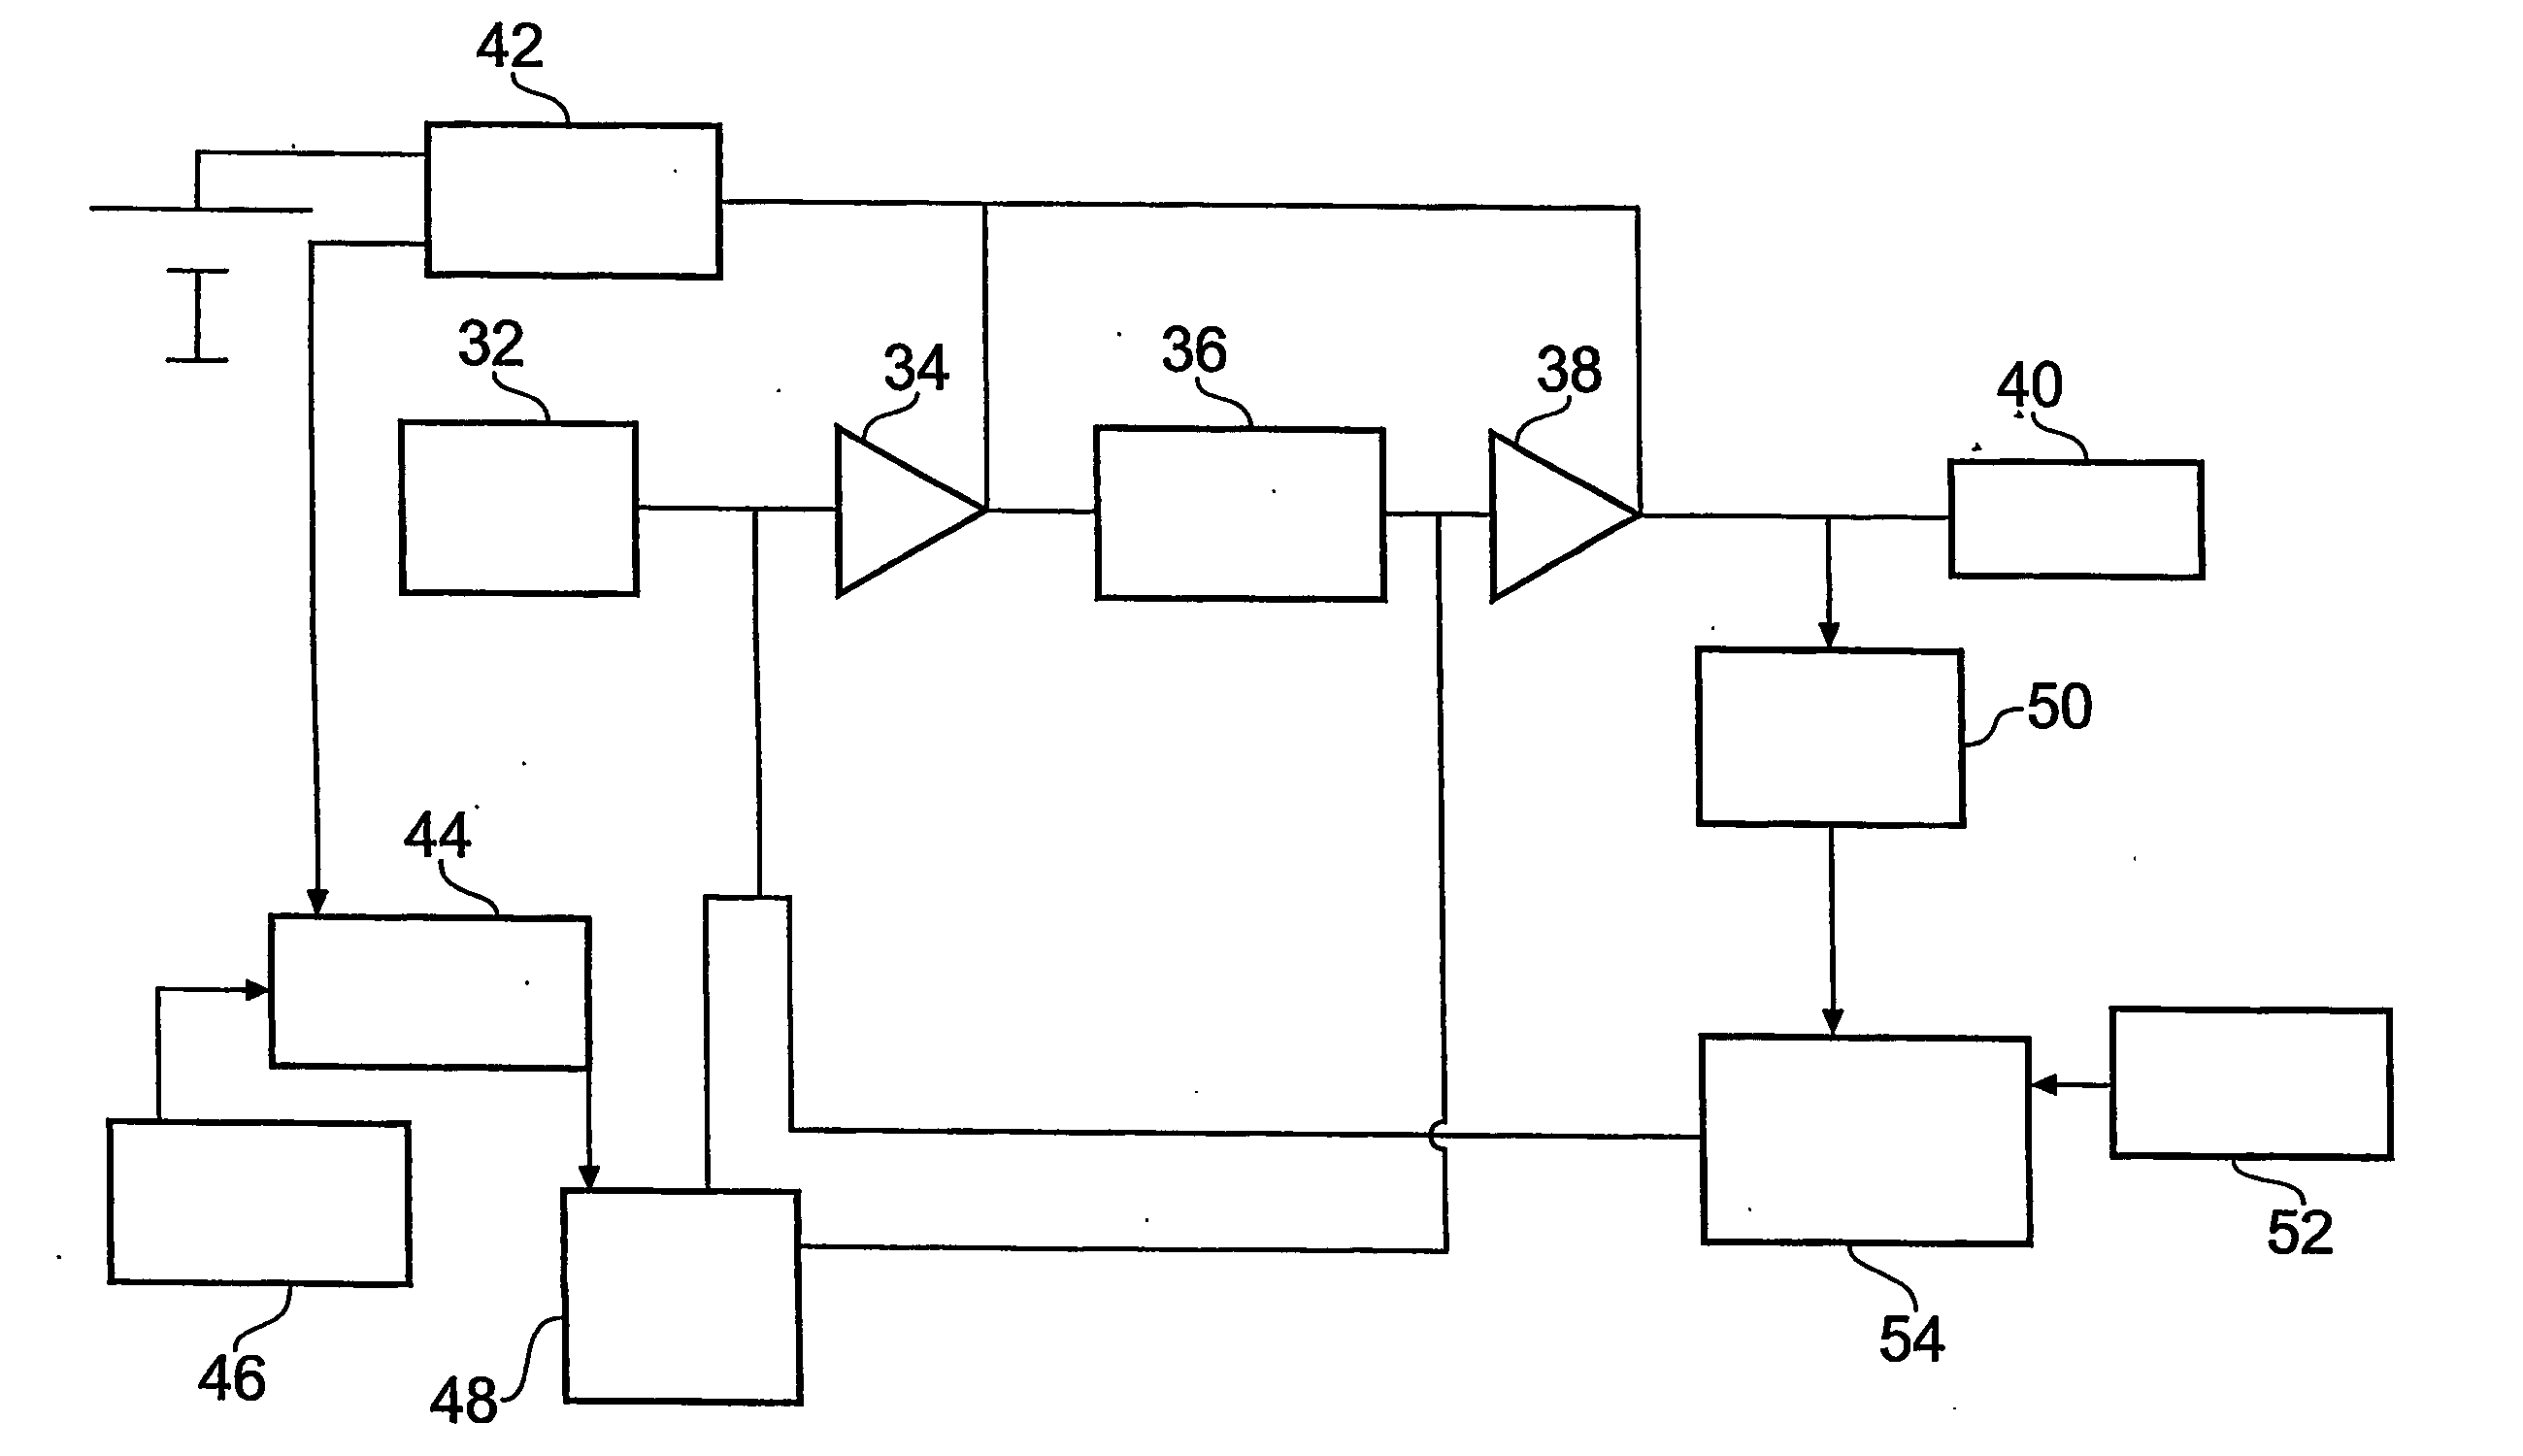 Circuit for power amplification